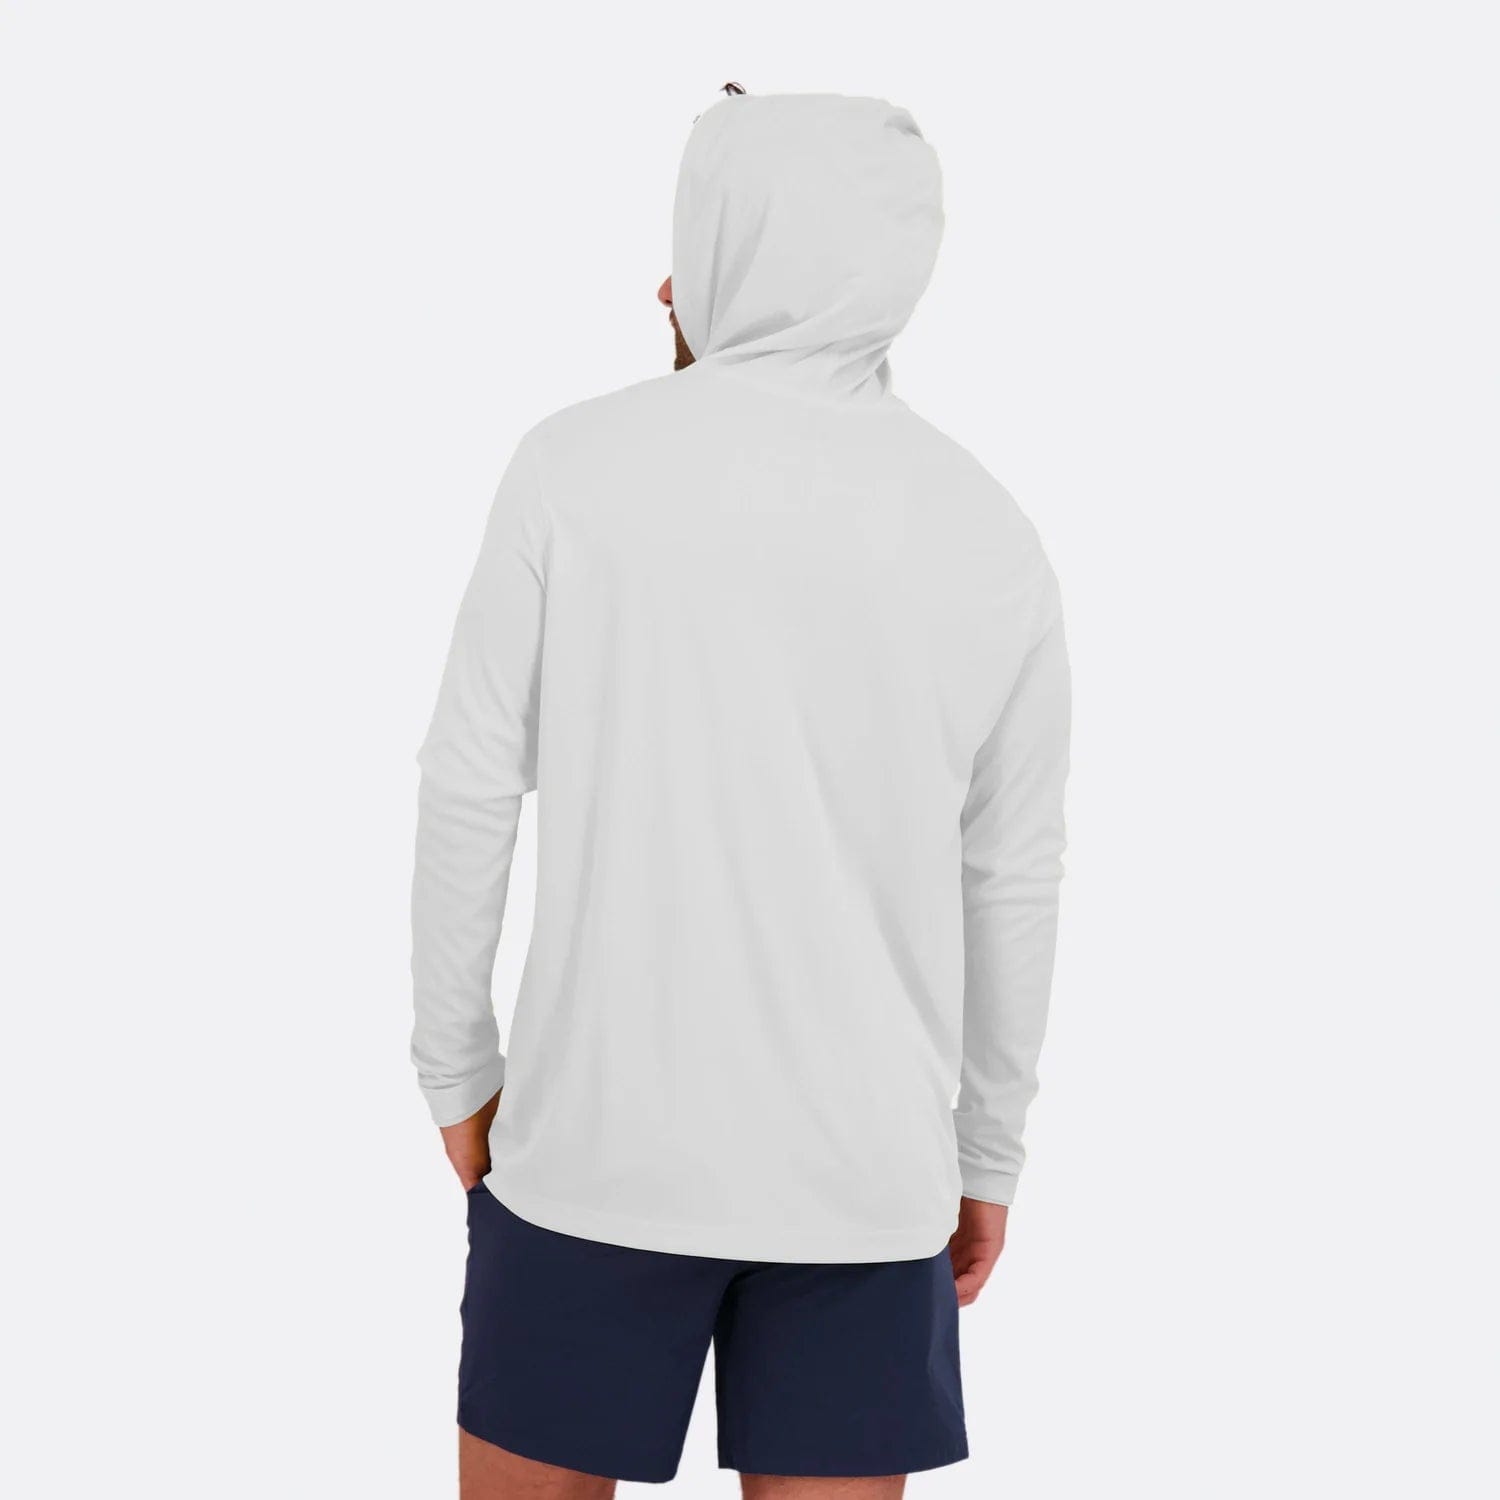 Hooded Performance Shirt, Sun Protection Clothing Men's